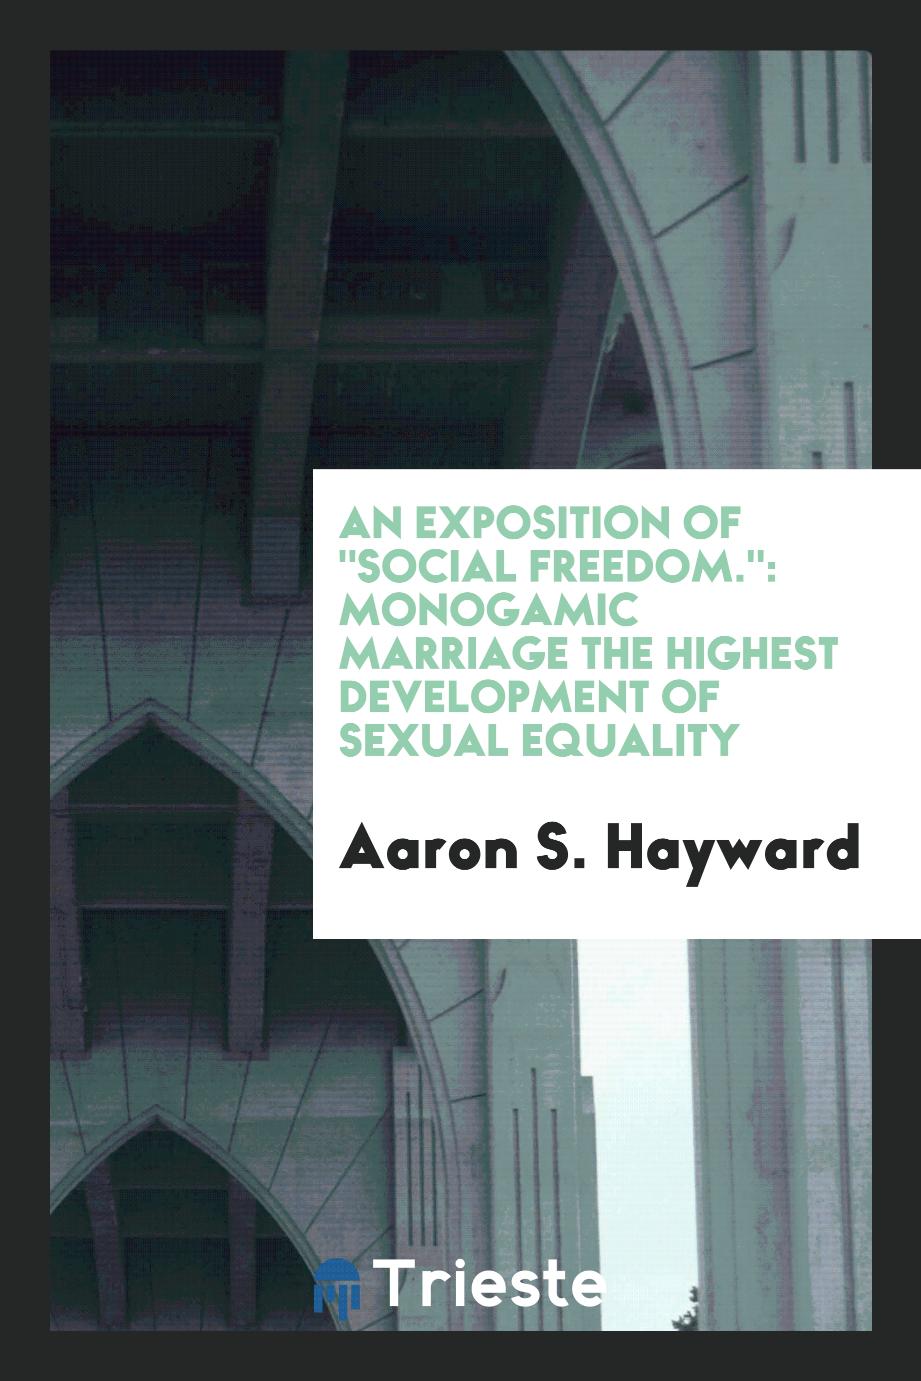 An Exposition of "Social Freedom.": Monogamic Marriage the Highest Development of Sexual Equality